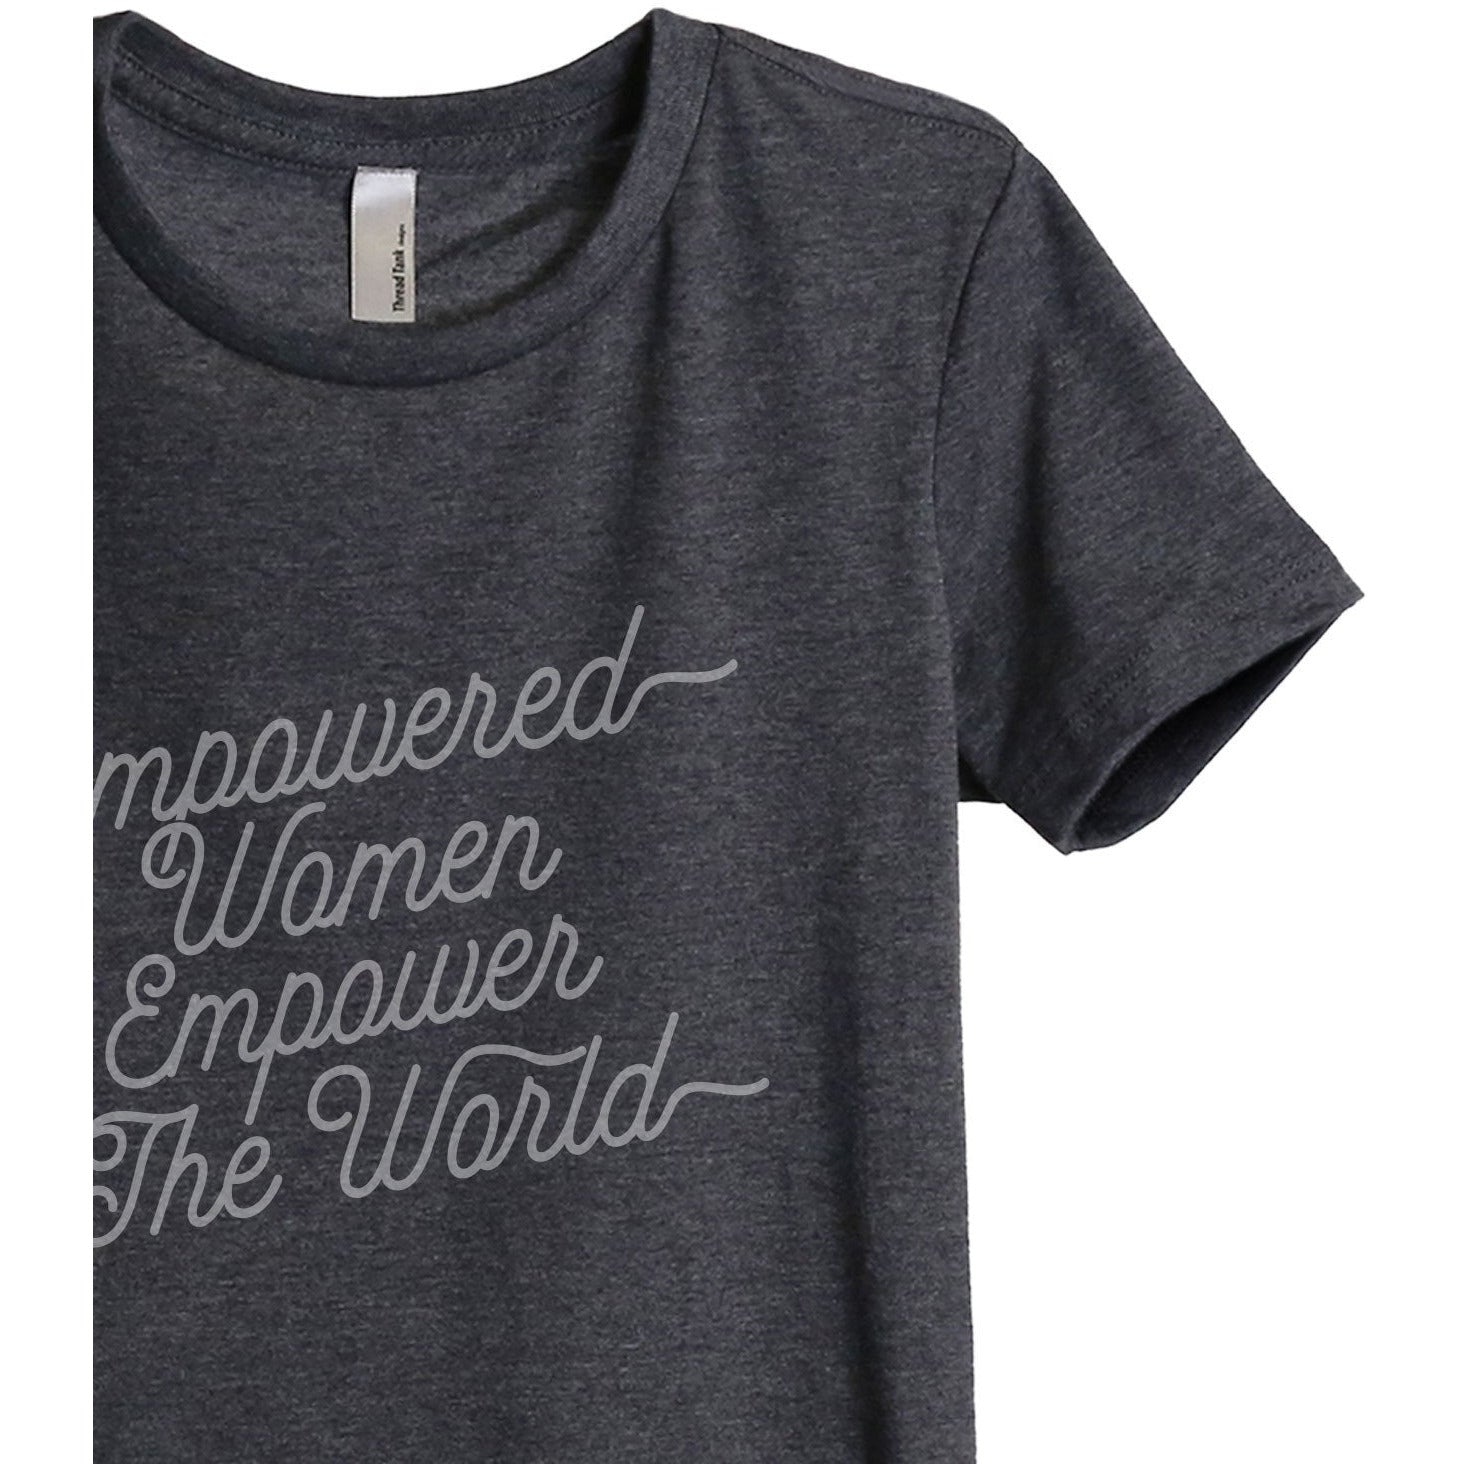 Empowered Women Empower The World Women's Relaxed Crewneck T-Shirt Top Tee Charcoal Grey Zoom Details